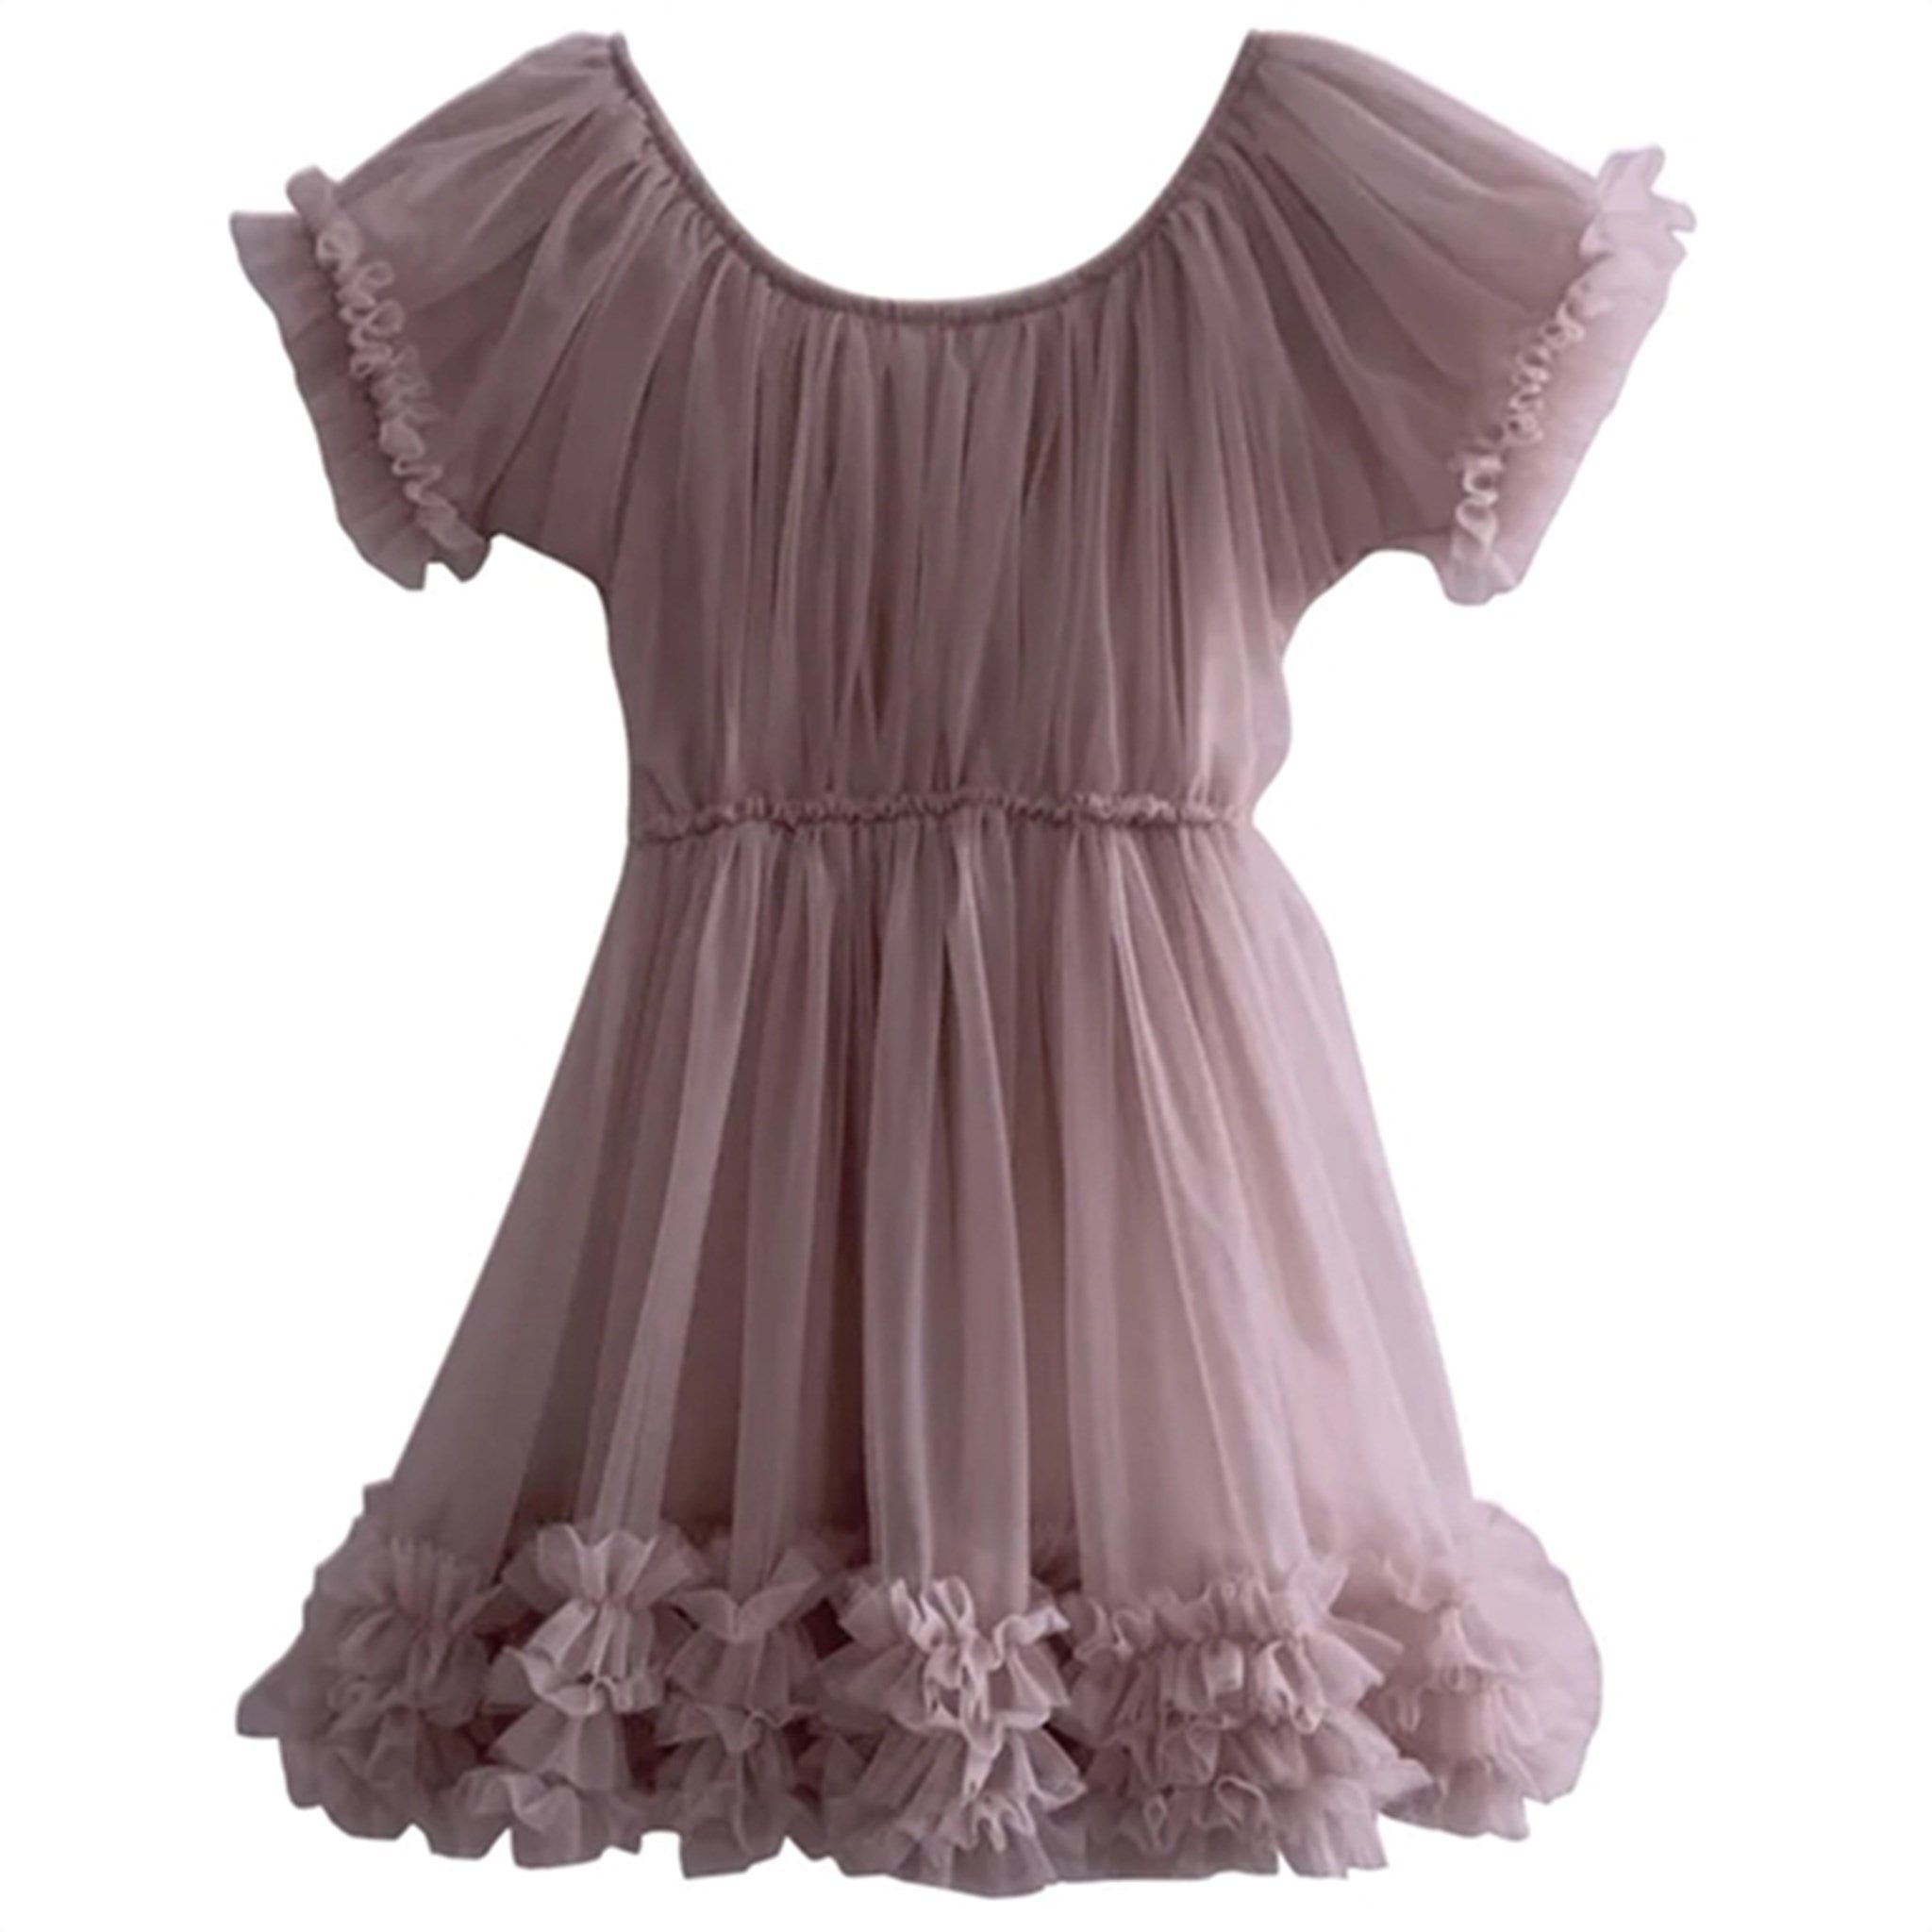 Dolly by Le Petit Frilly Klänning Mauve